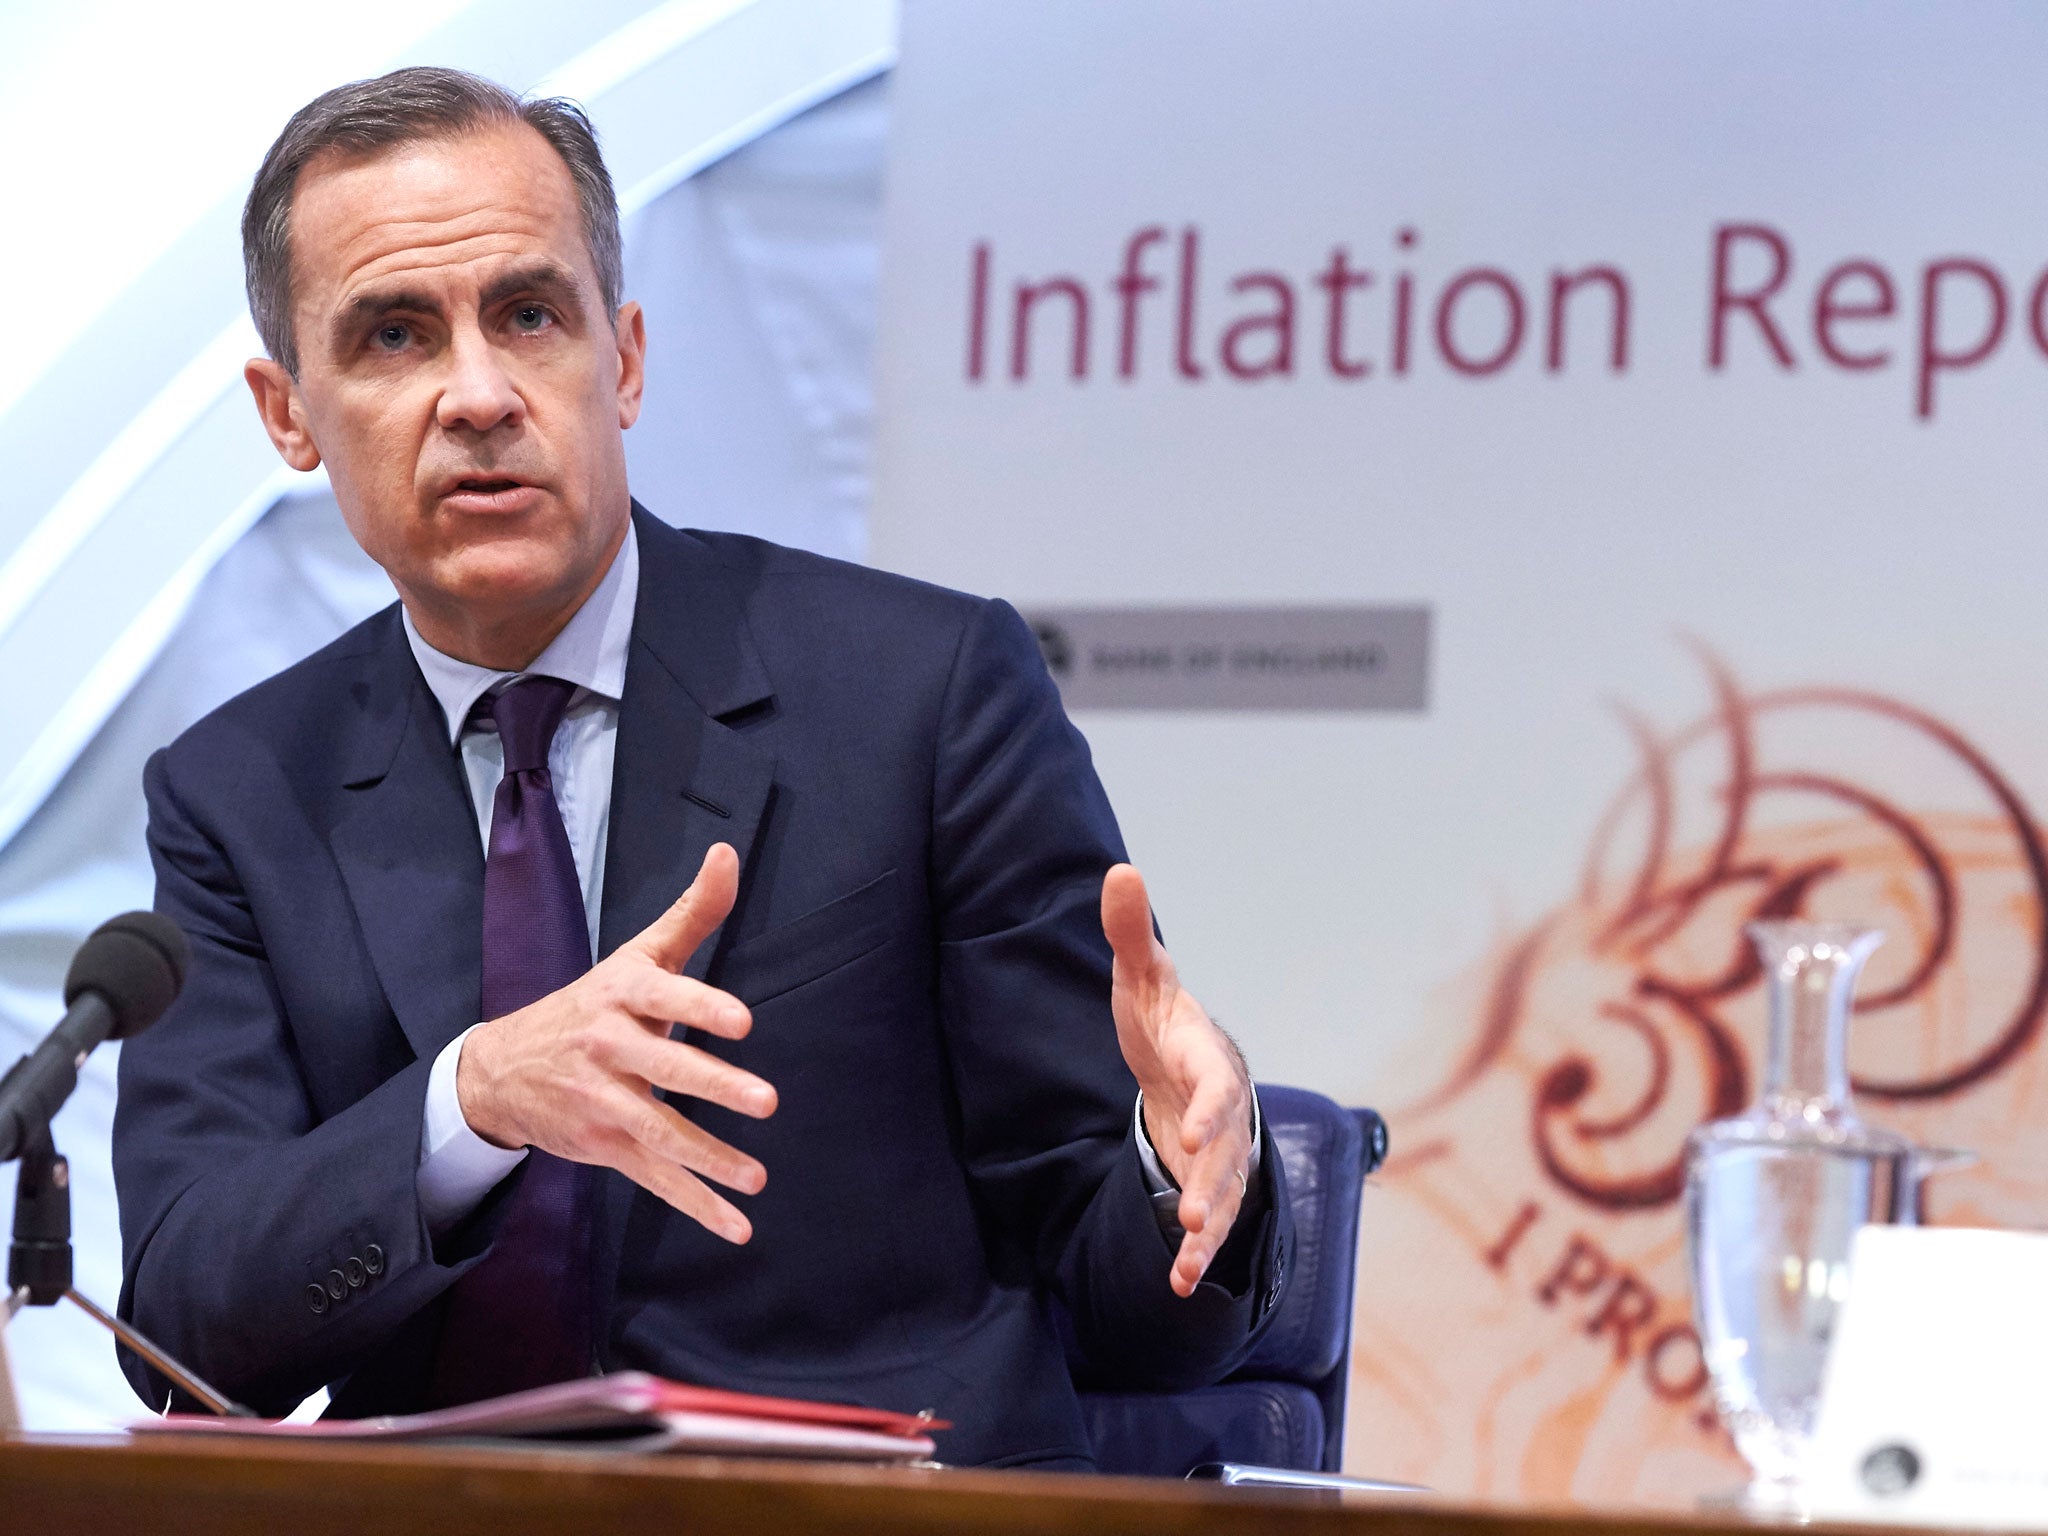 The Bank of England’s central forecast is for its base rate to hit 1.25 per cent towards the end of 2018